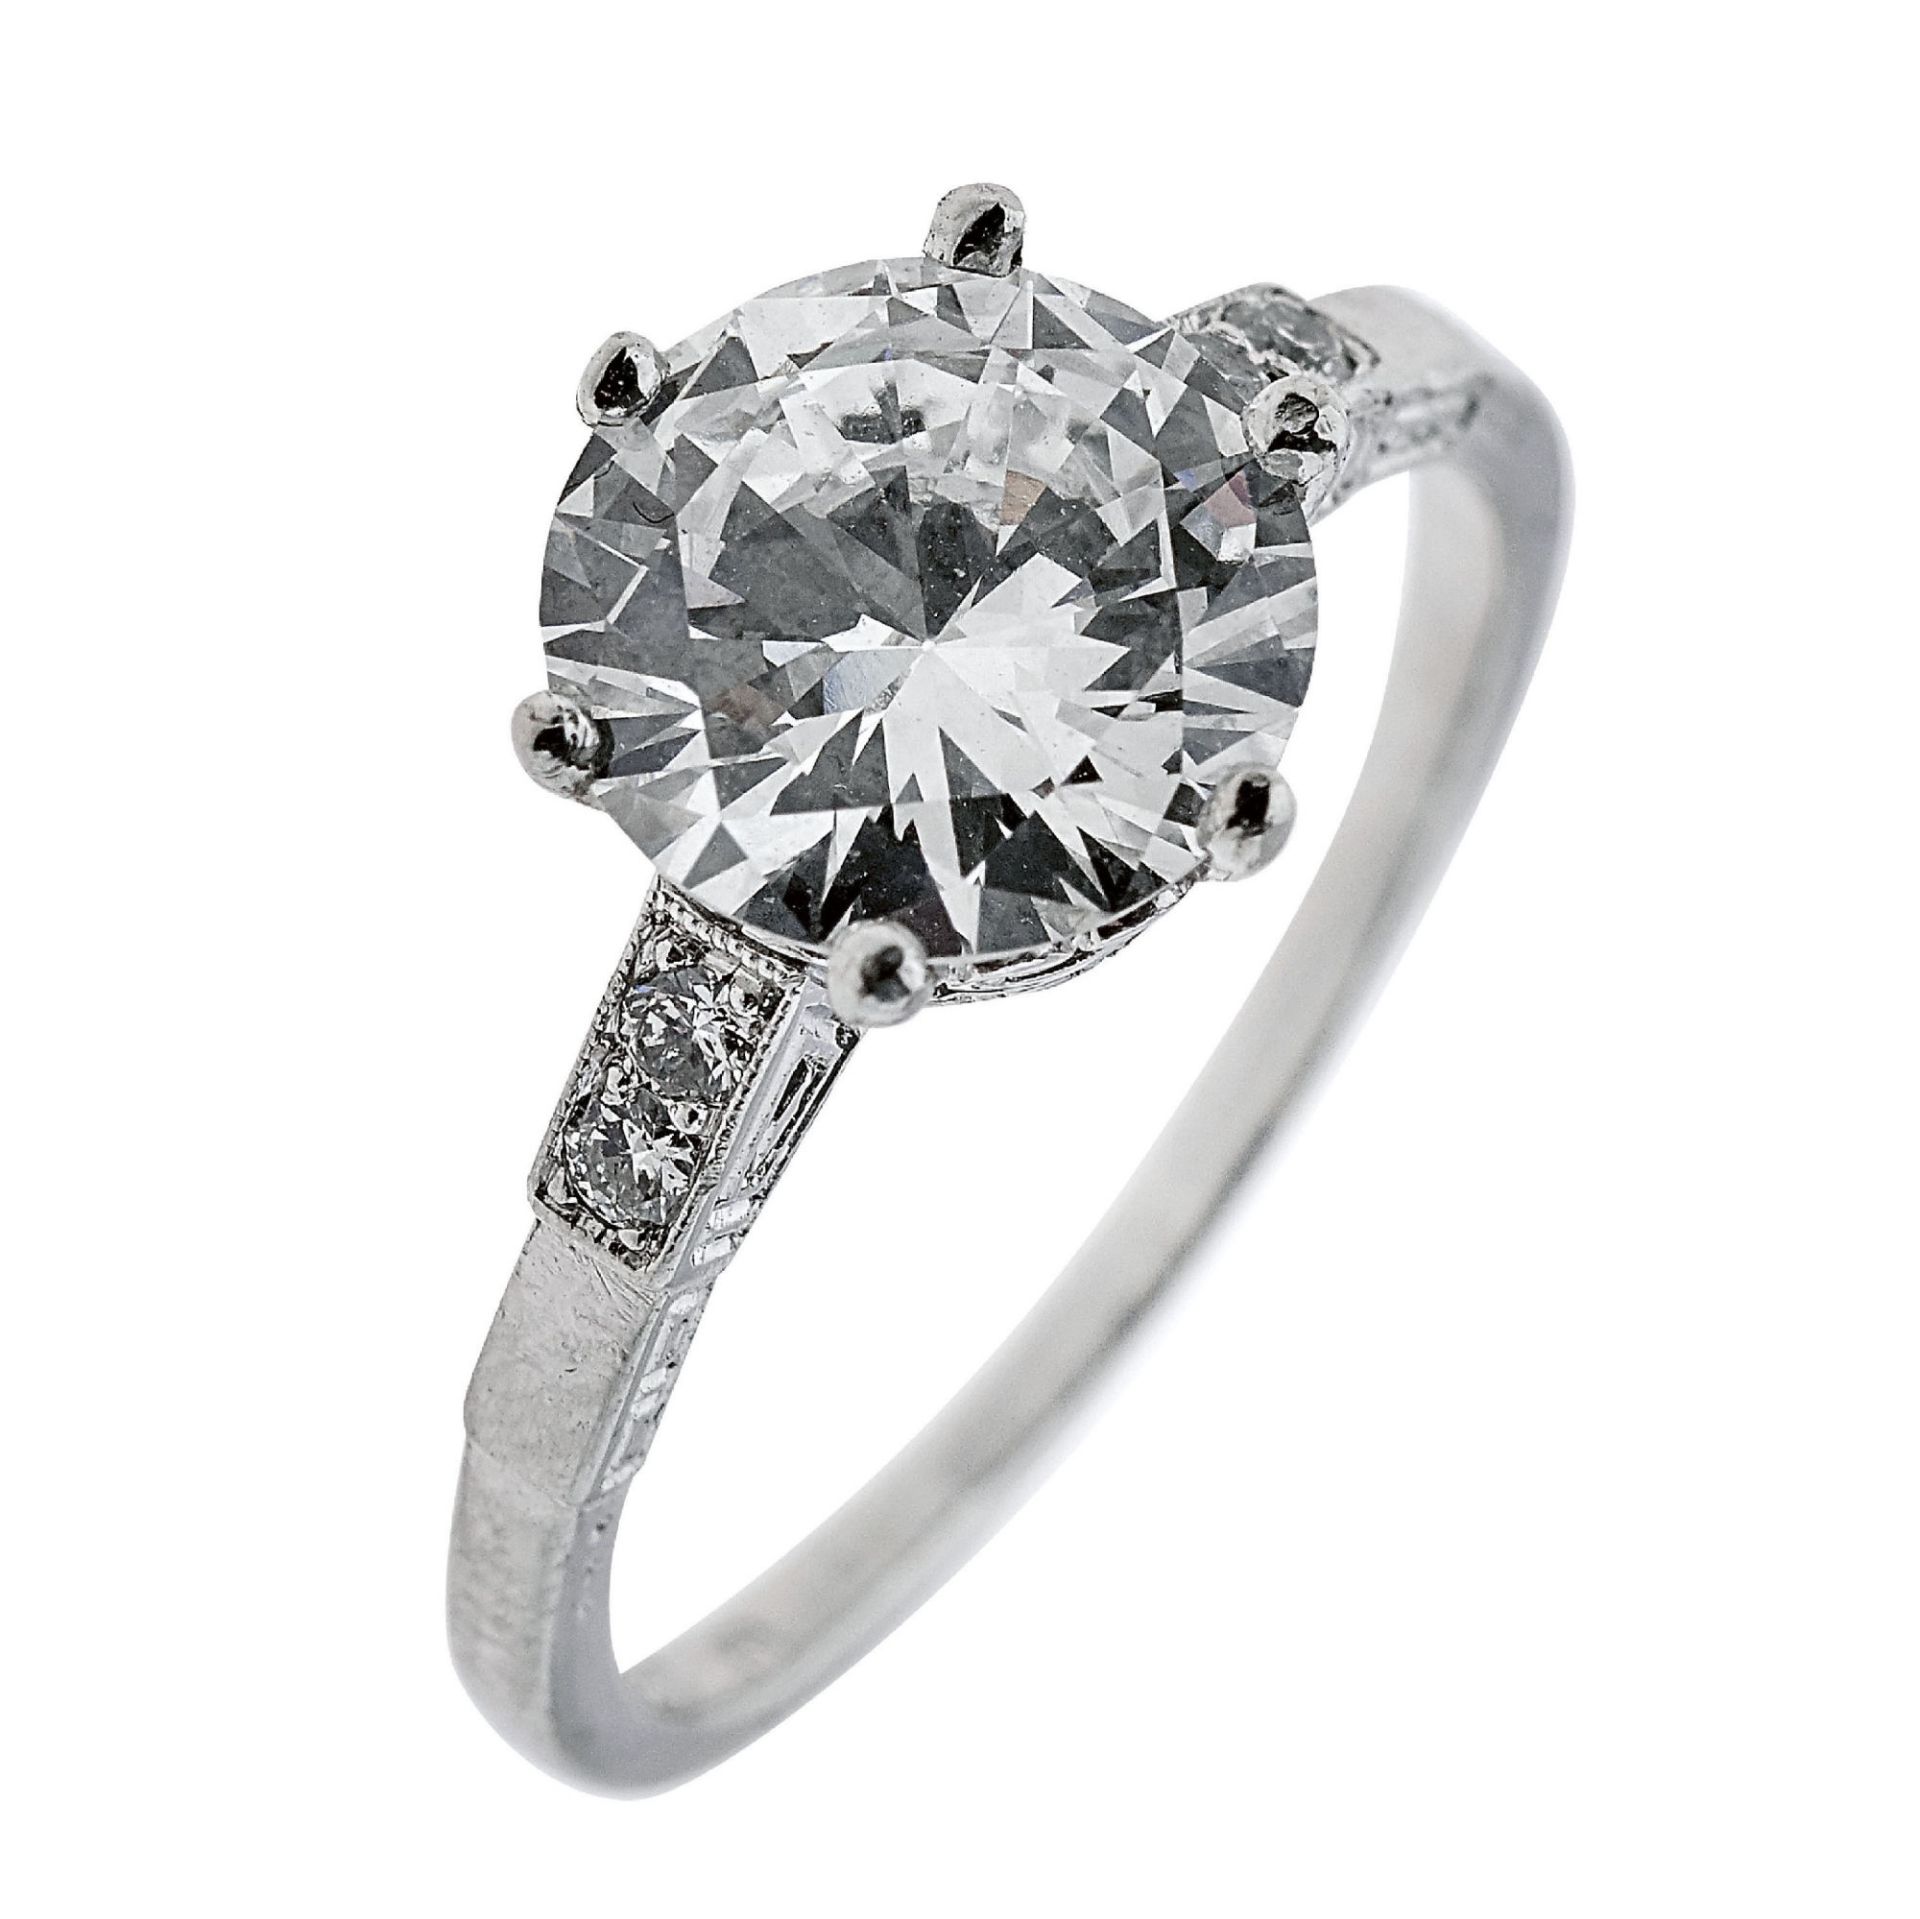 SOLITAIRE-RING / Diamond ring